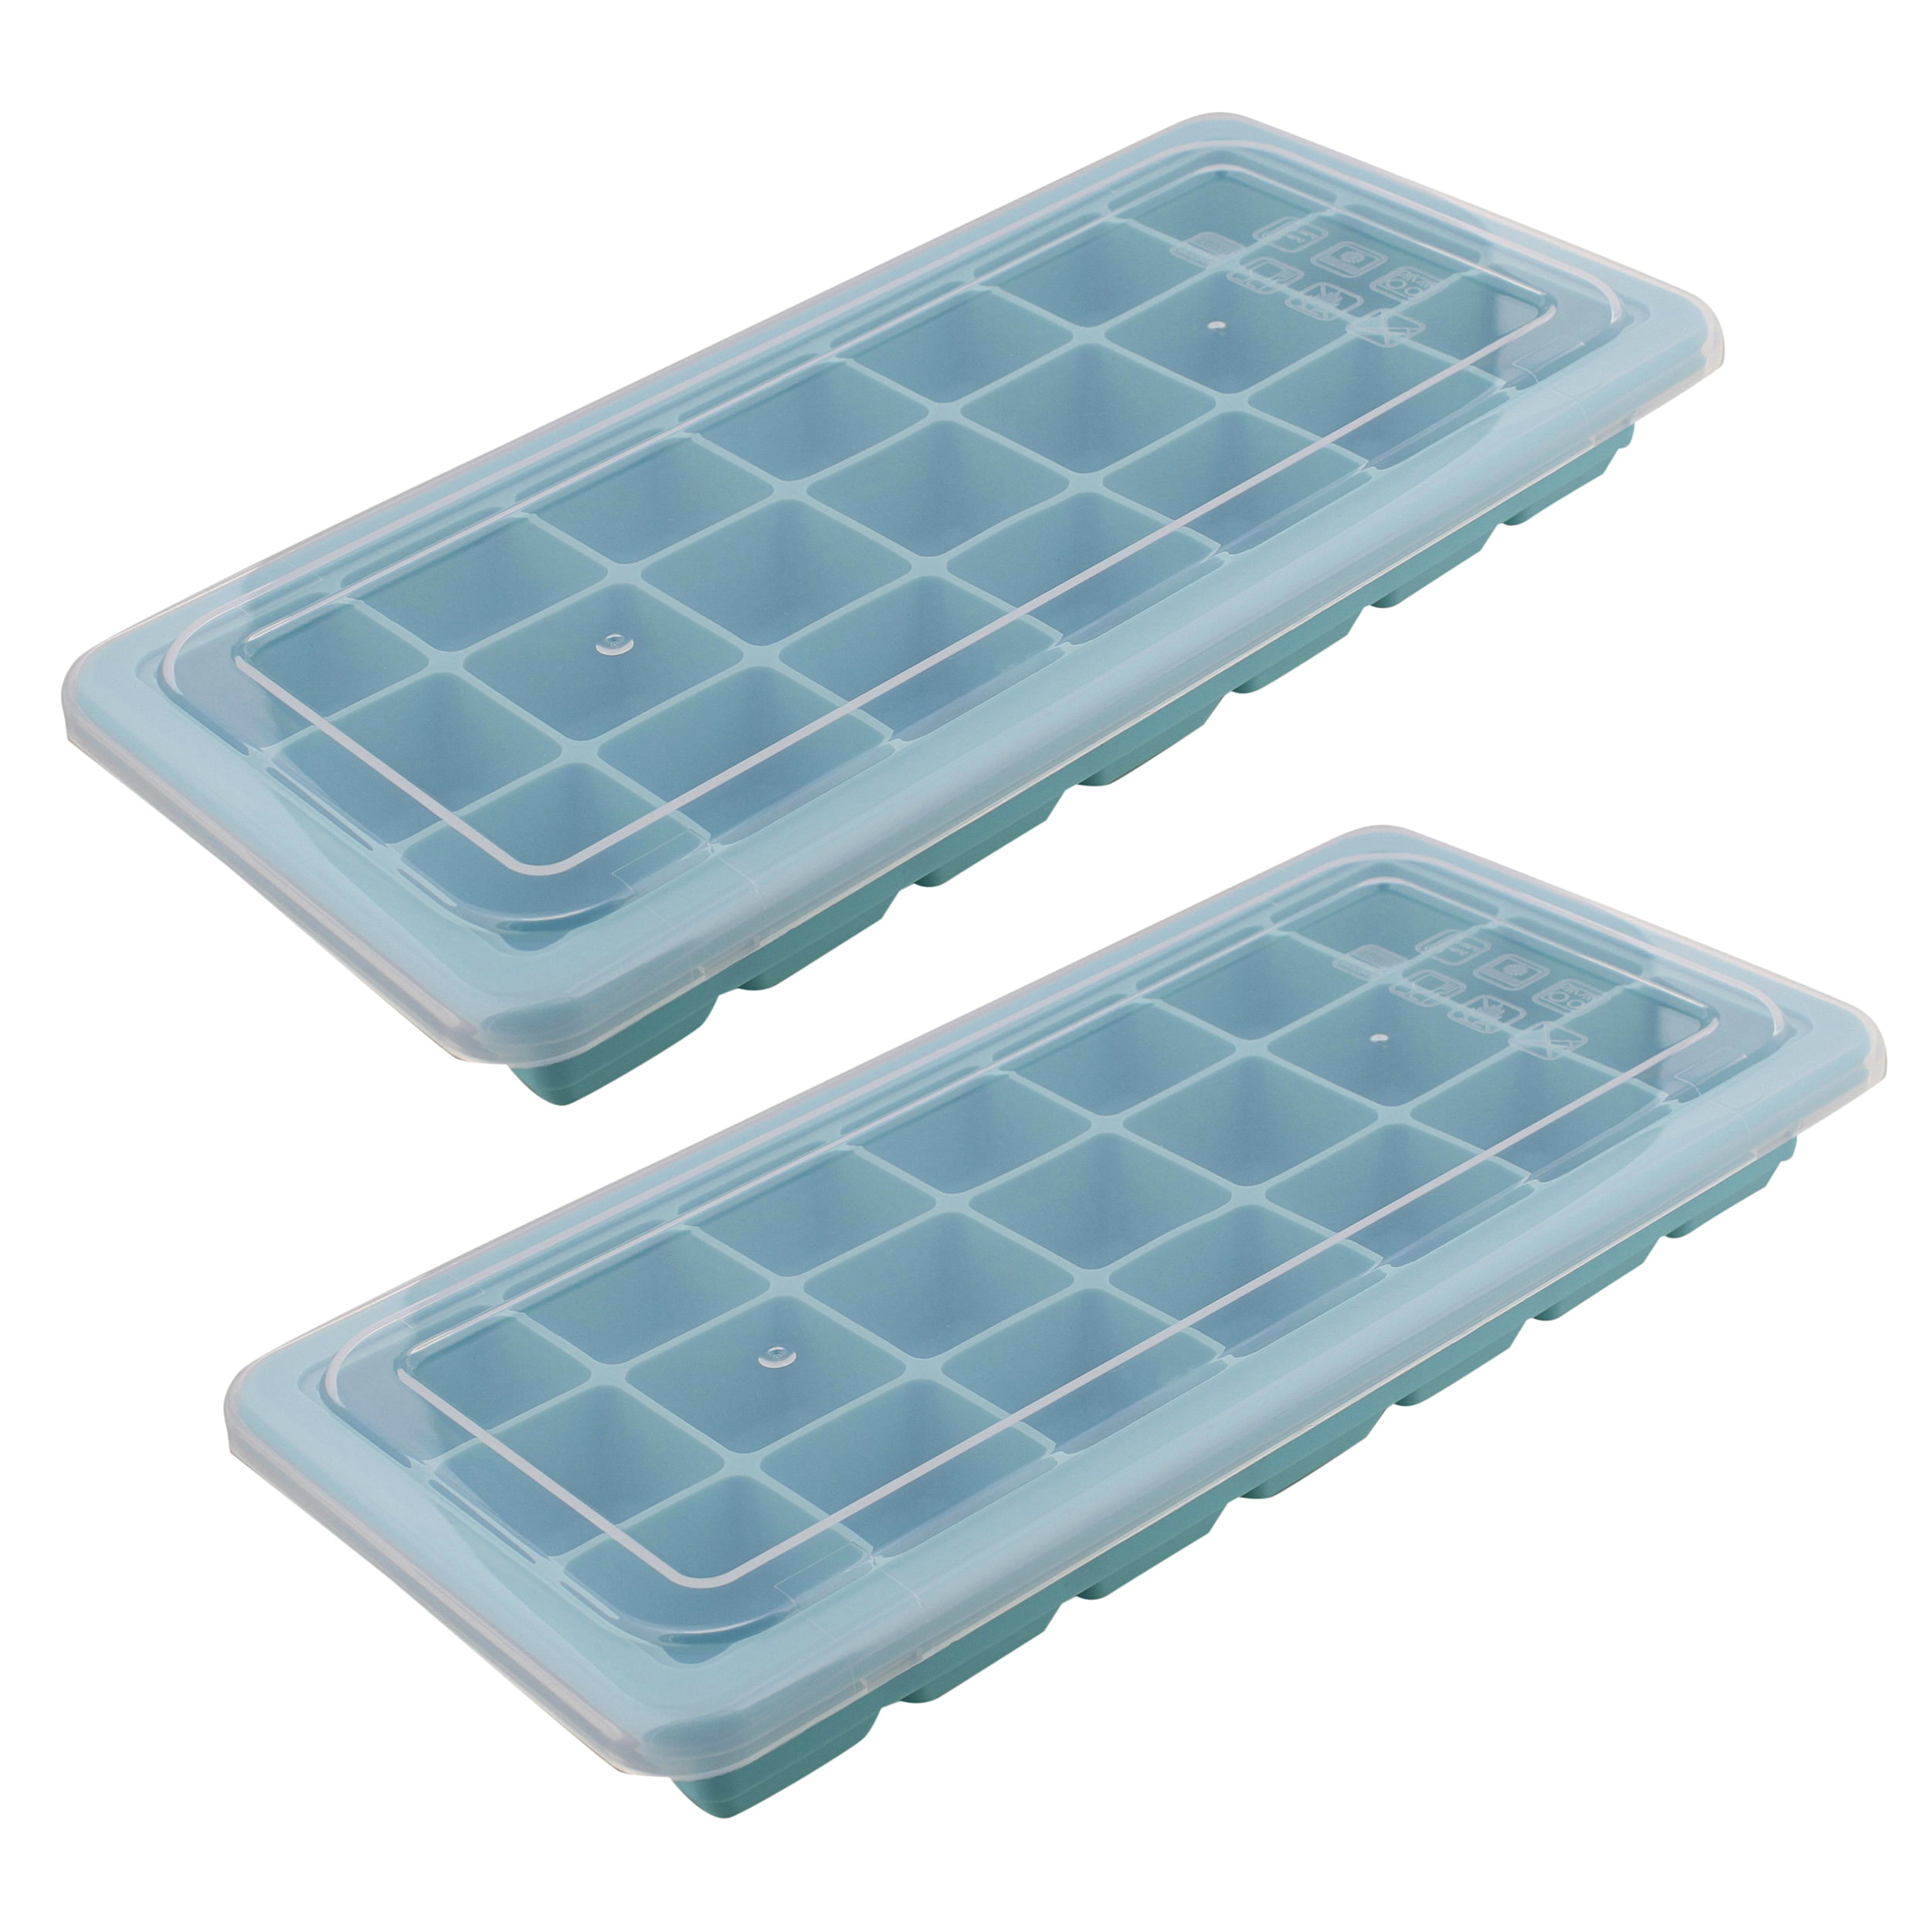  Large Blue Ice Cube Tray, Set of 2 Silicone Ice Trays By Scotch  Rocks: Large Ice Cube Tray: Home & Kitchen